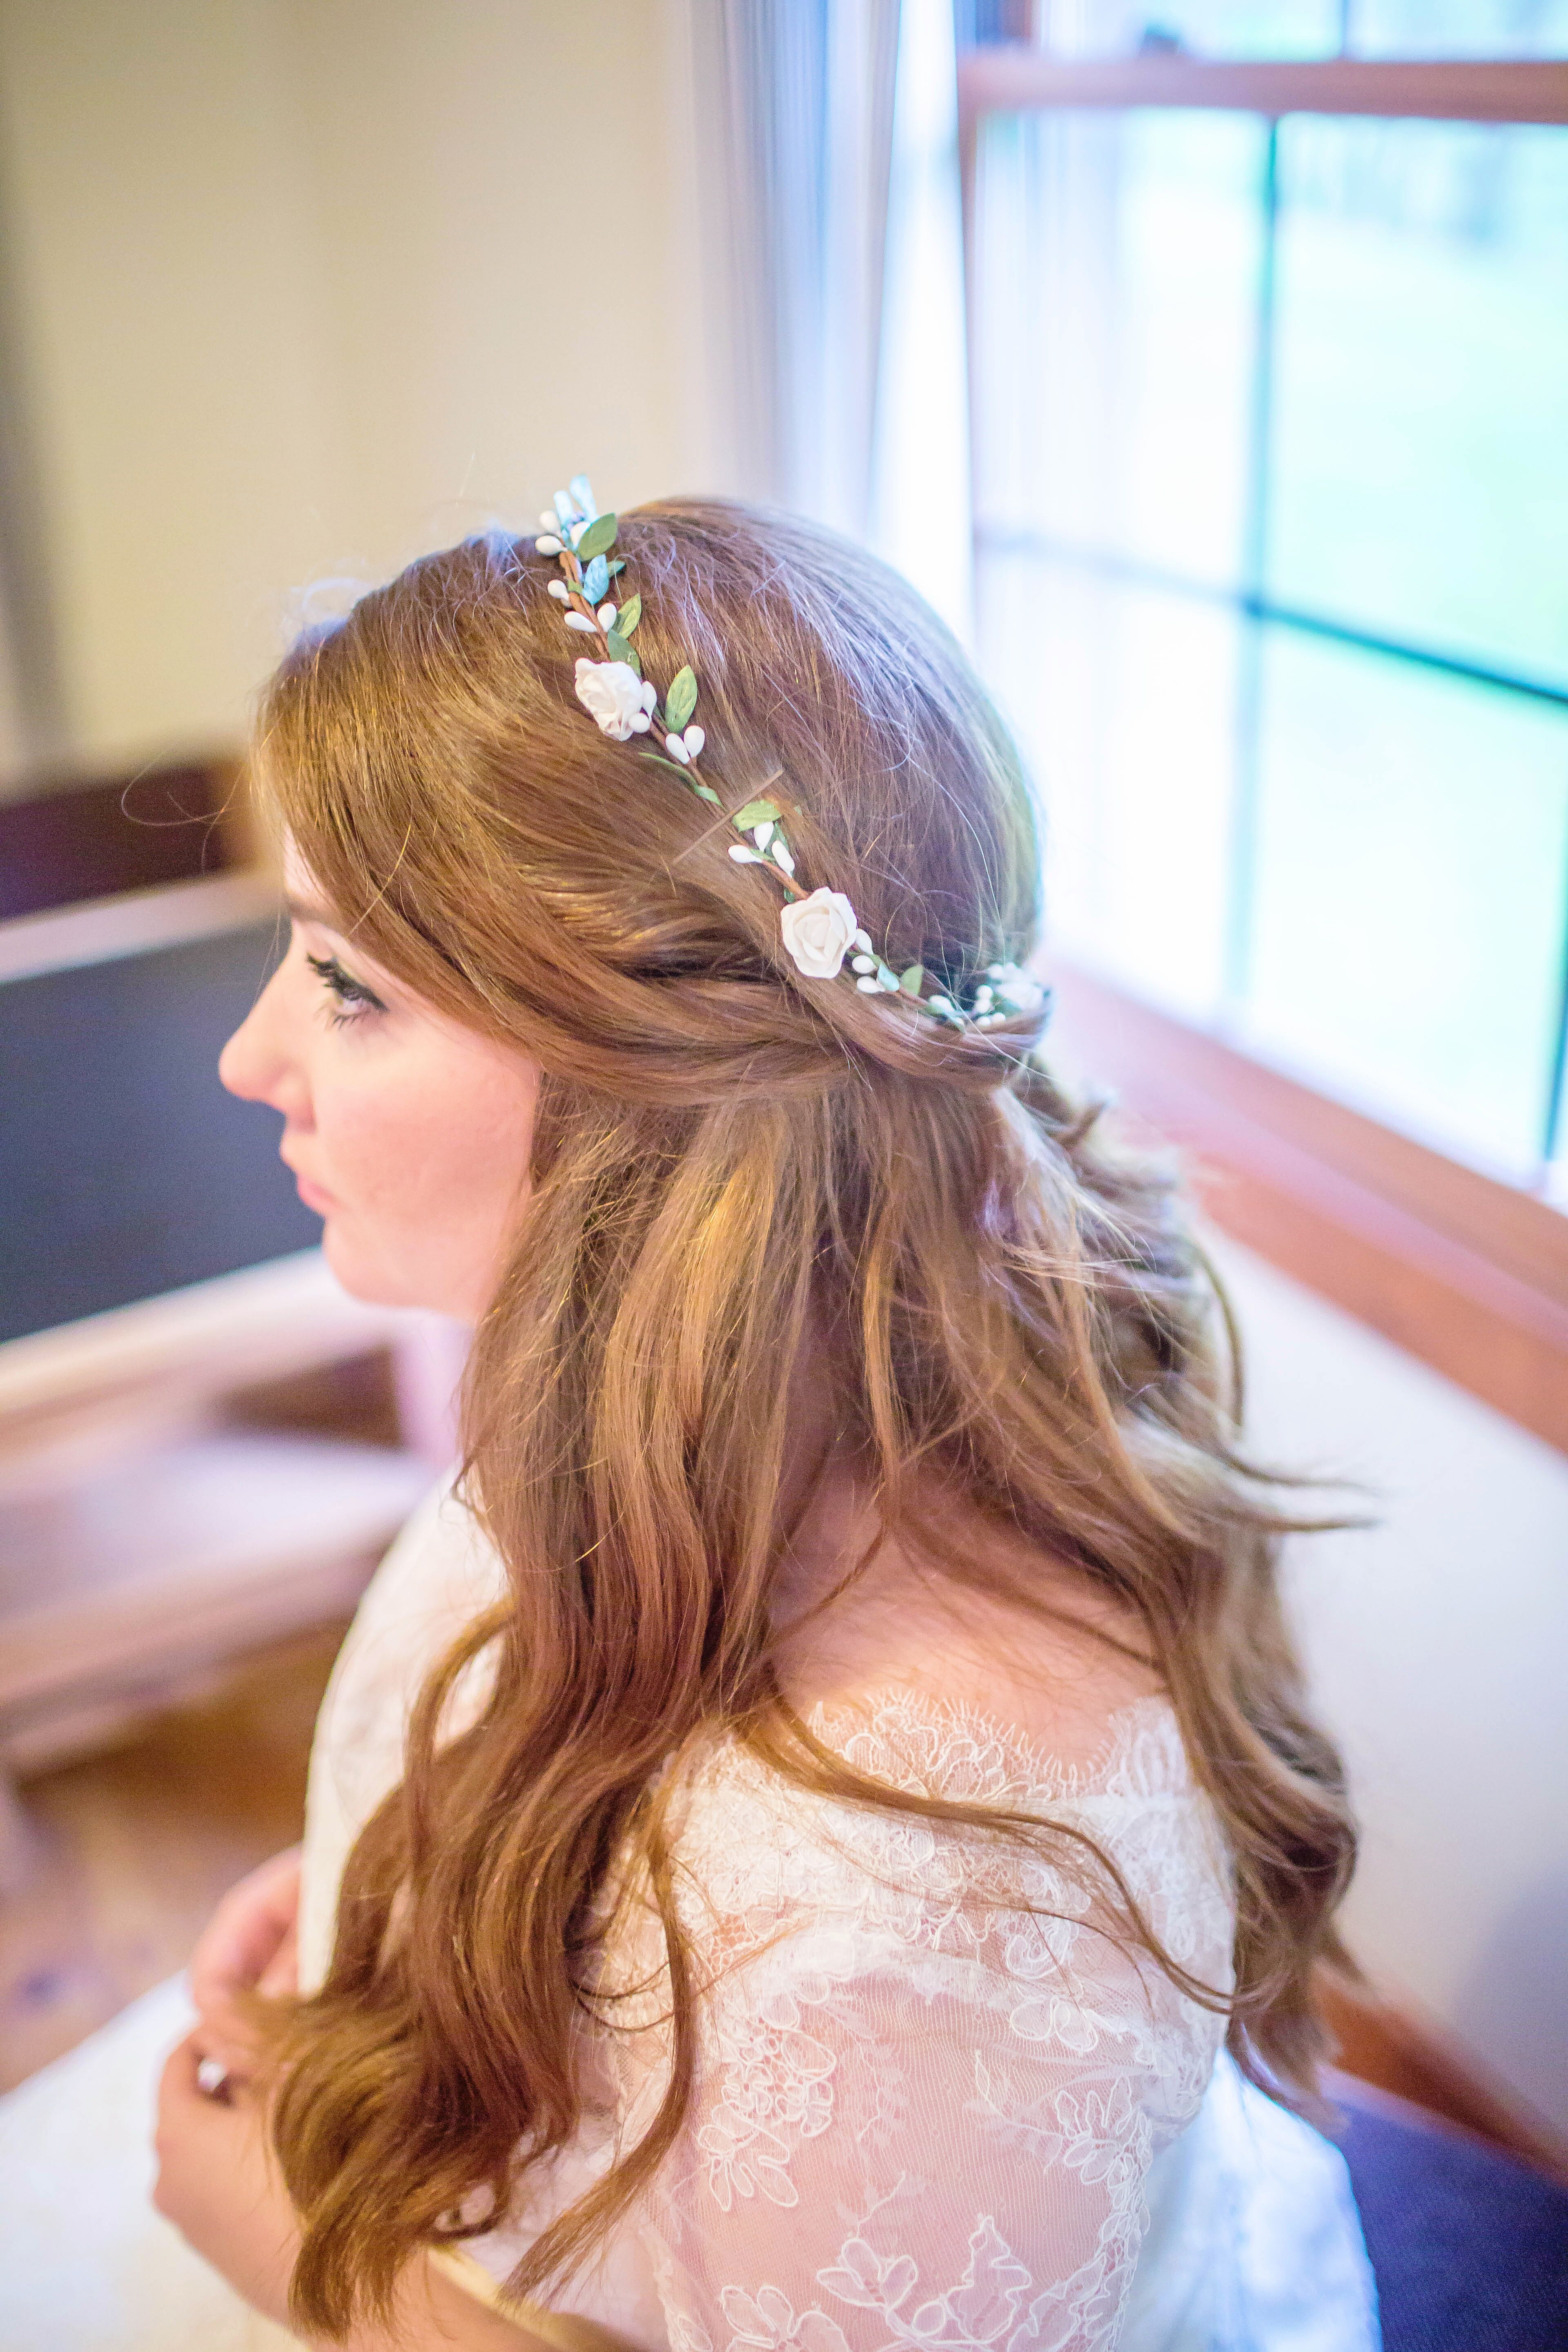 Dainty Flower Crown and Half-Up Hairstyle